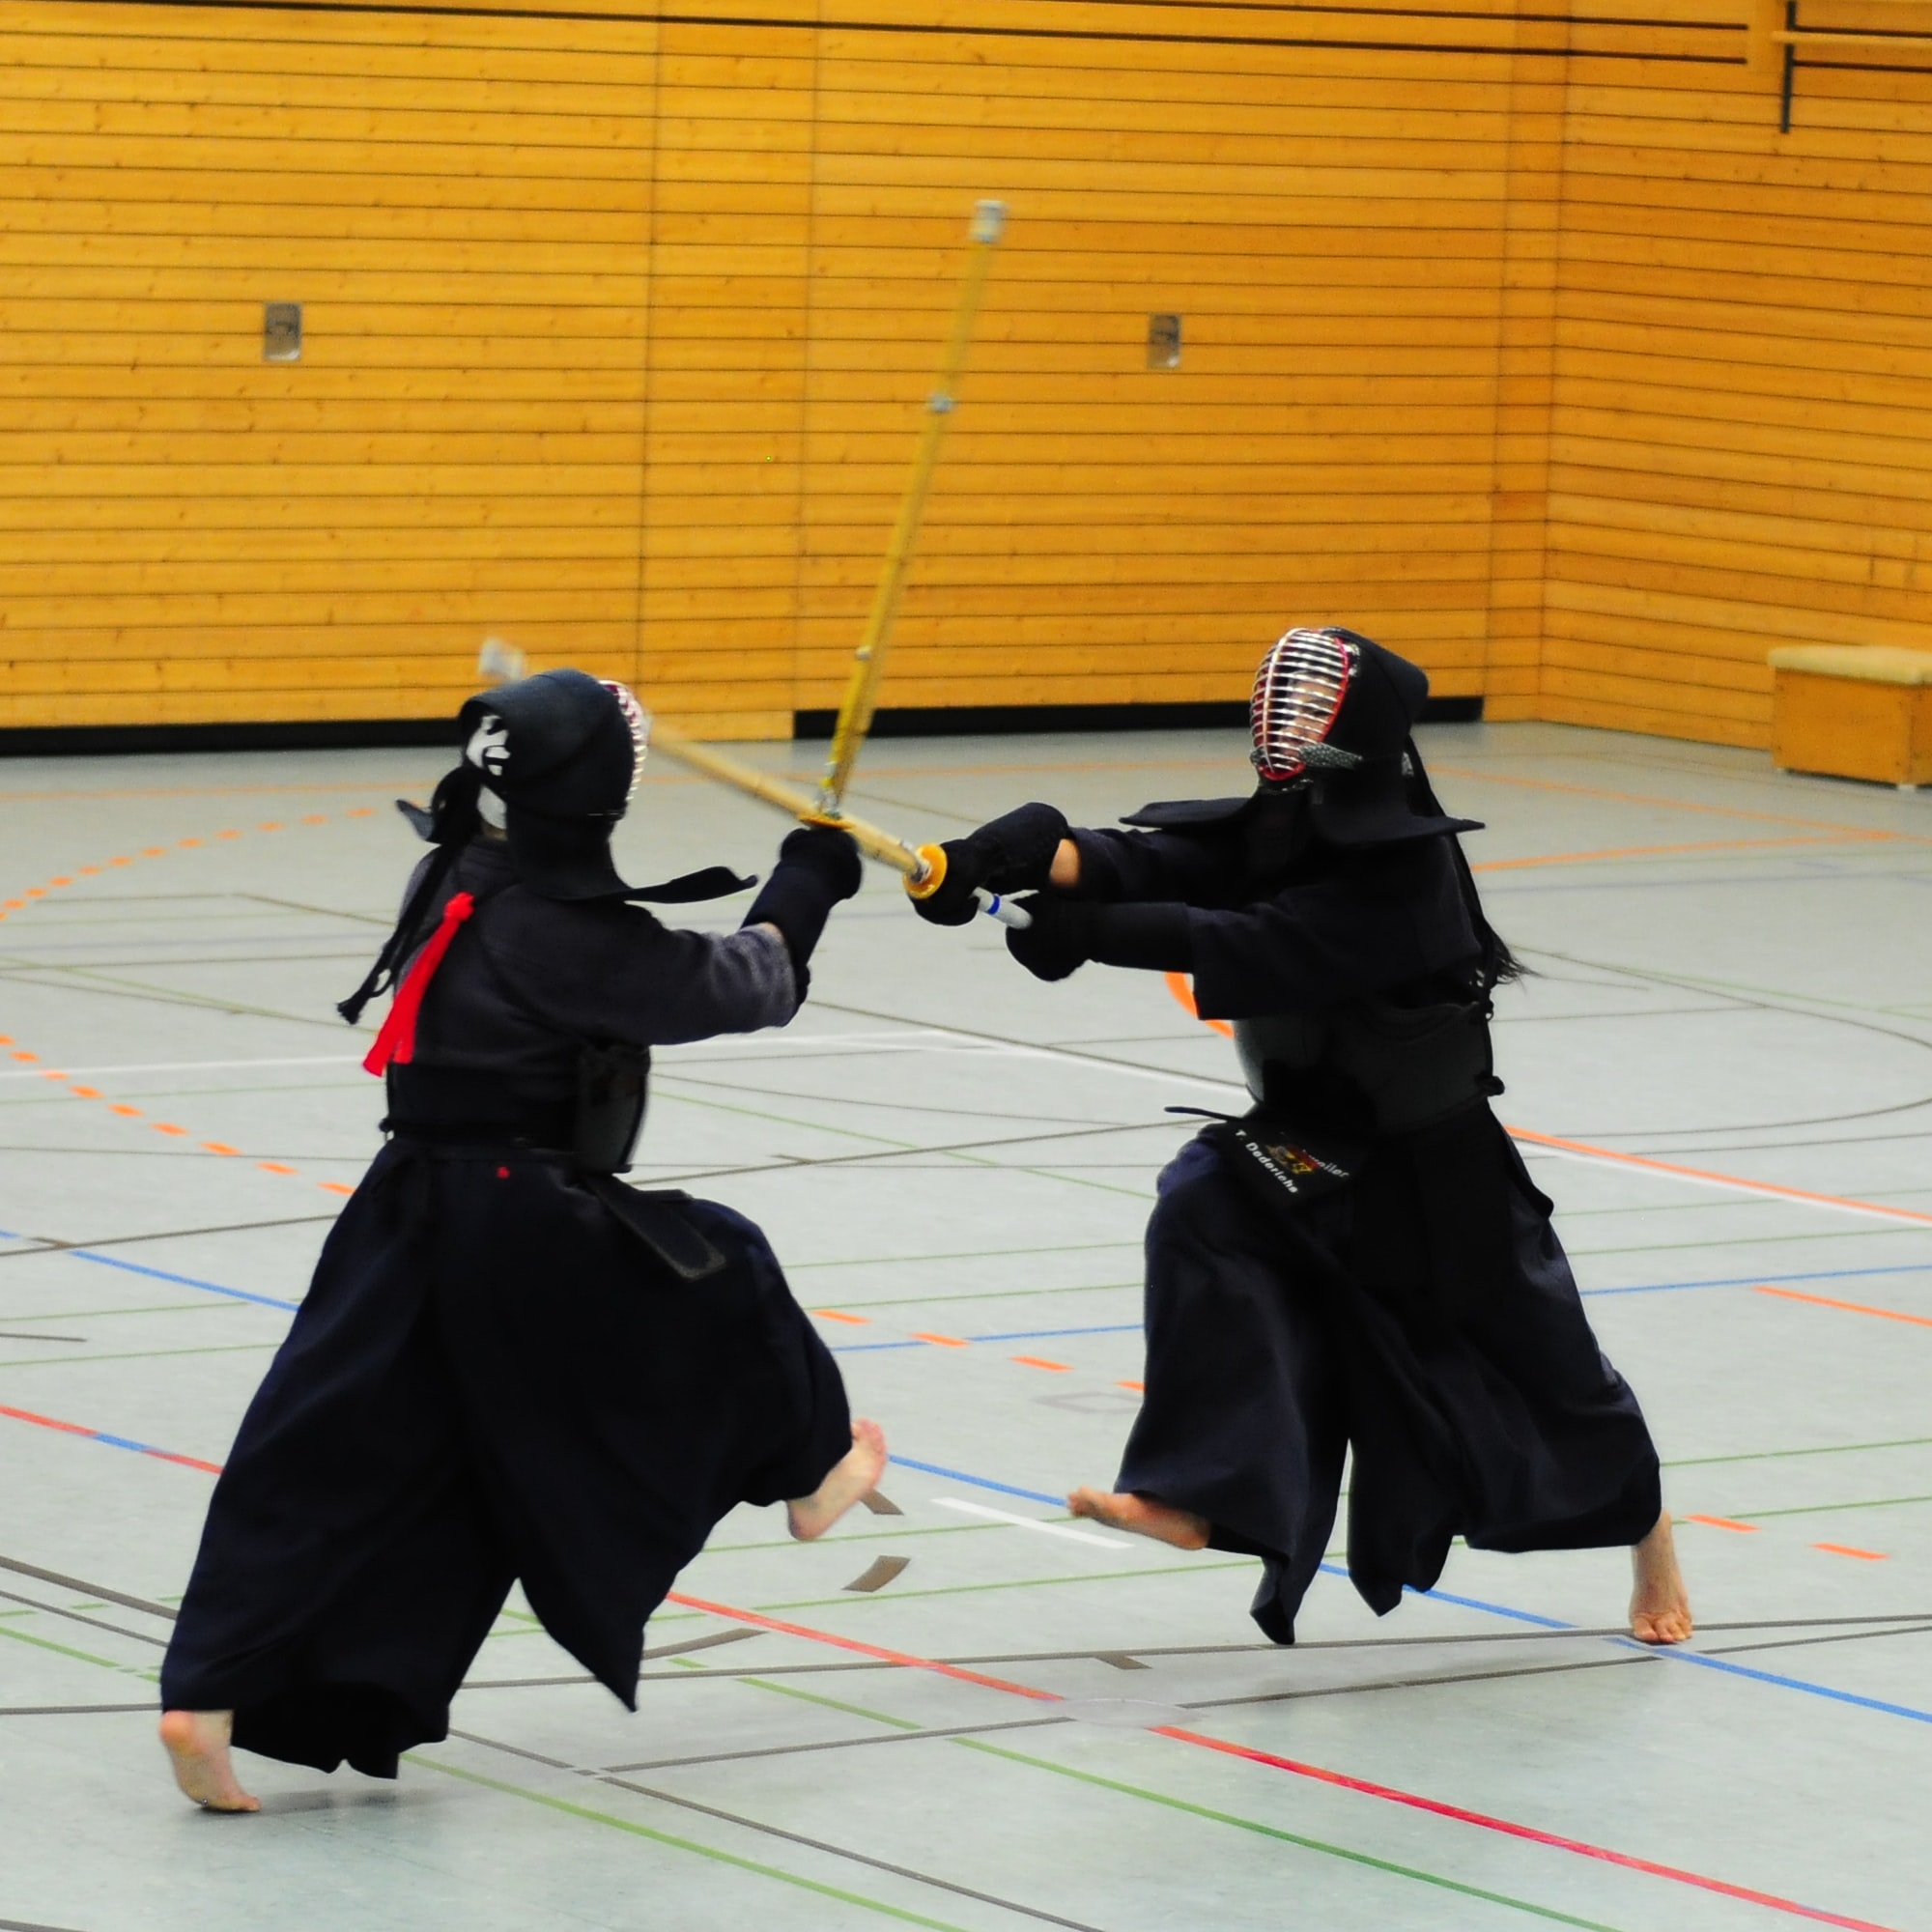 A first strike with Kendo and the SFU Kendo club